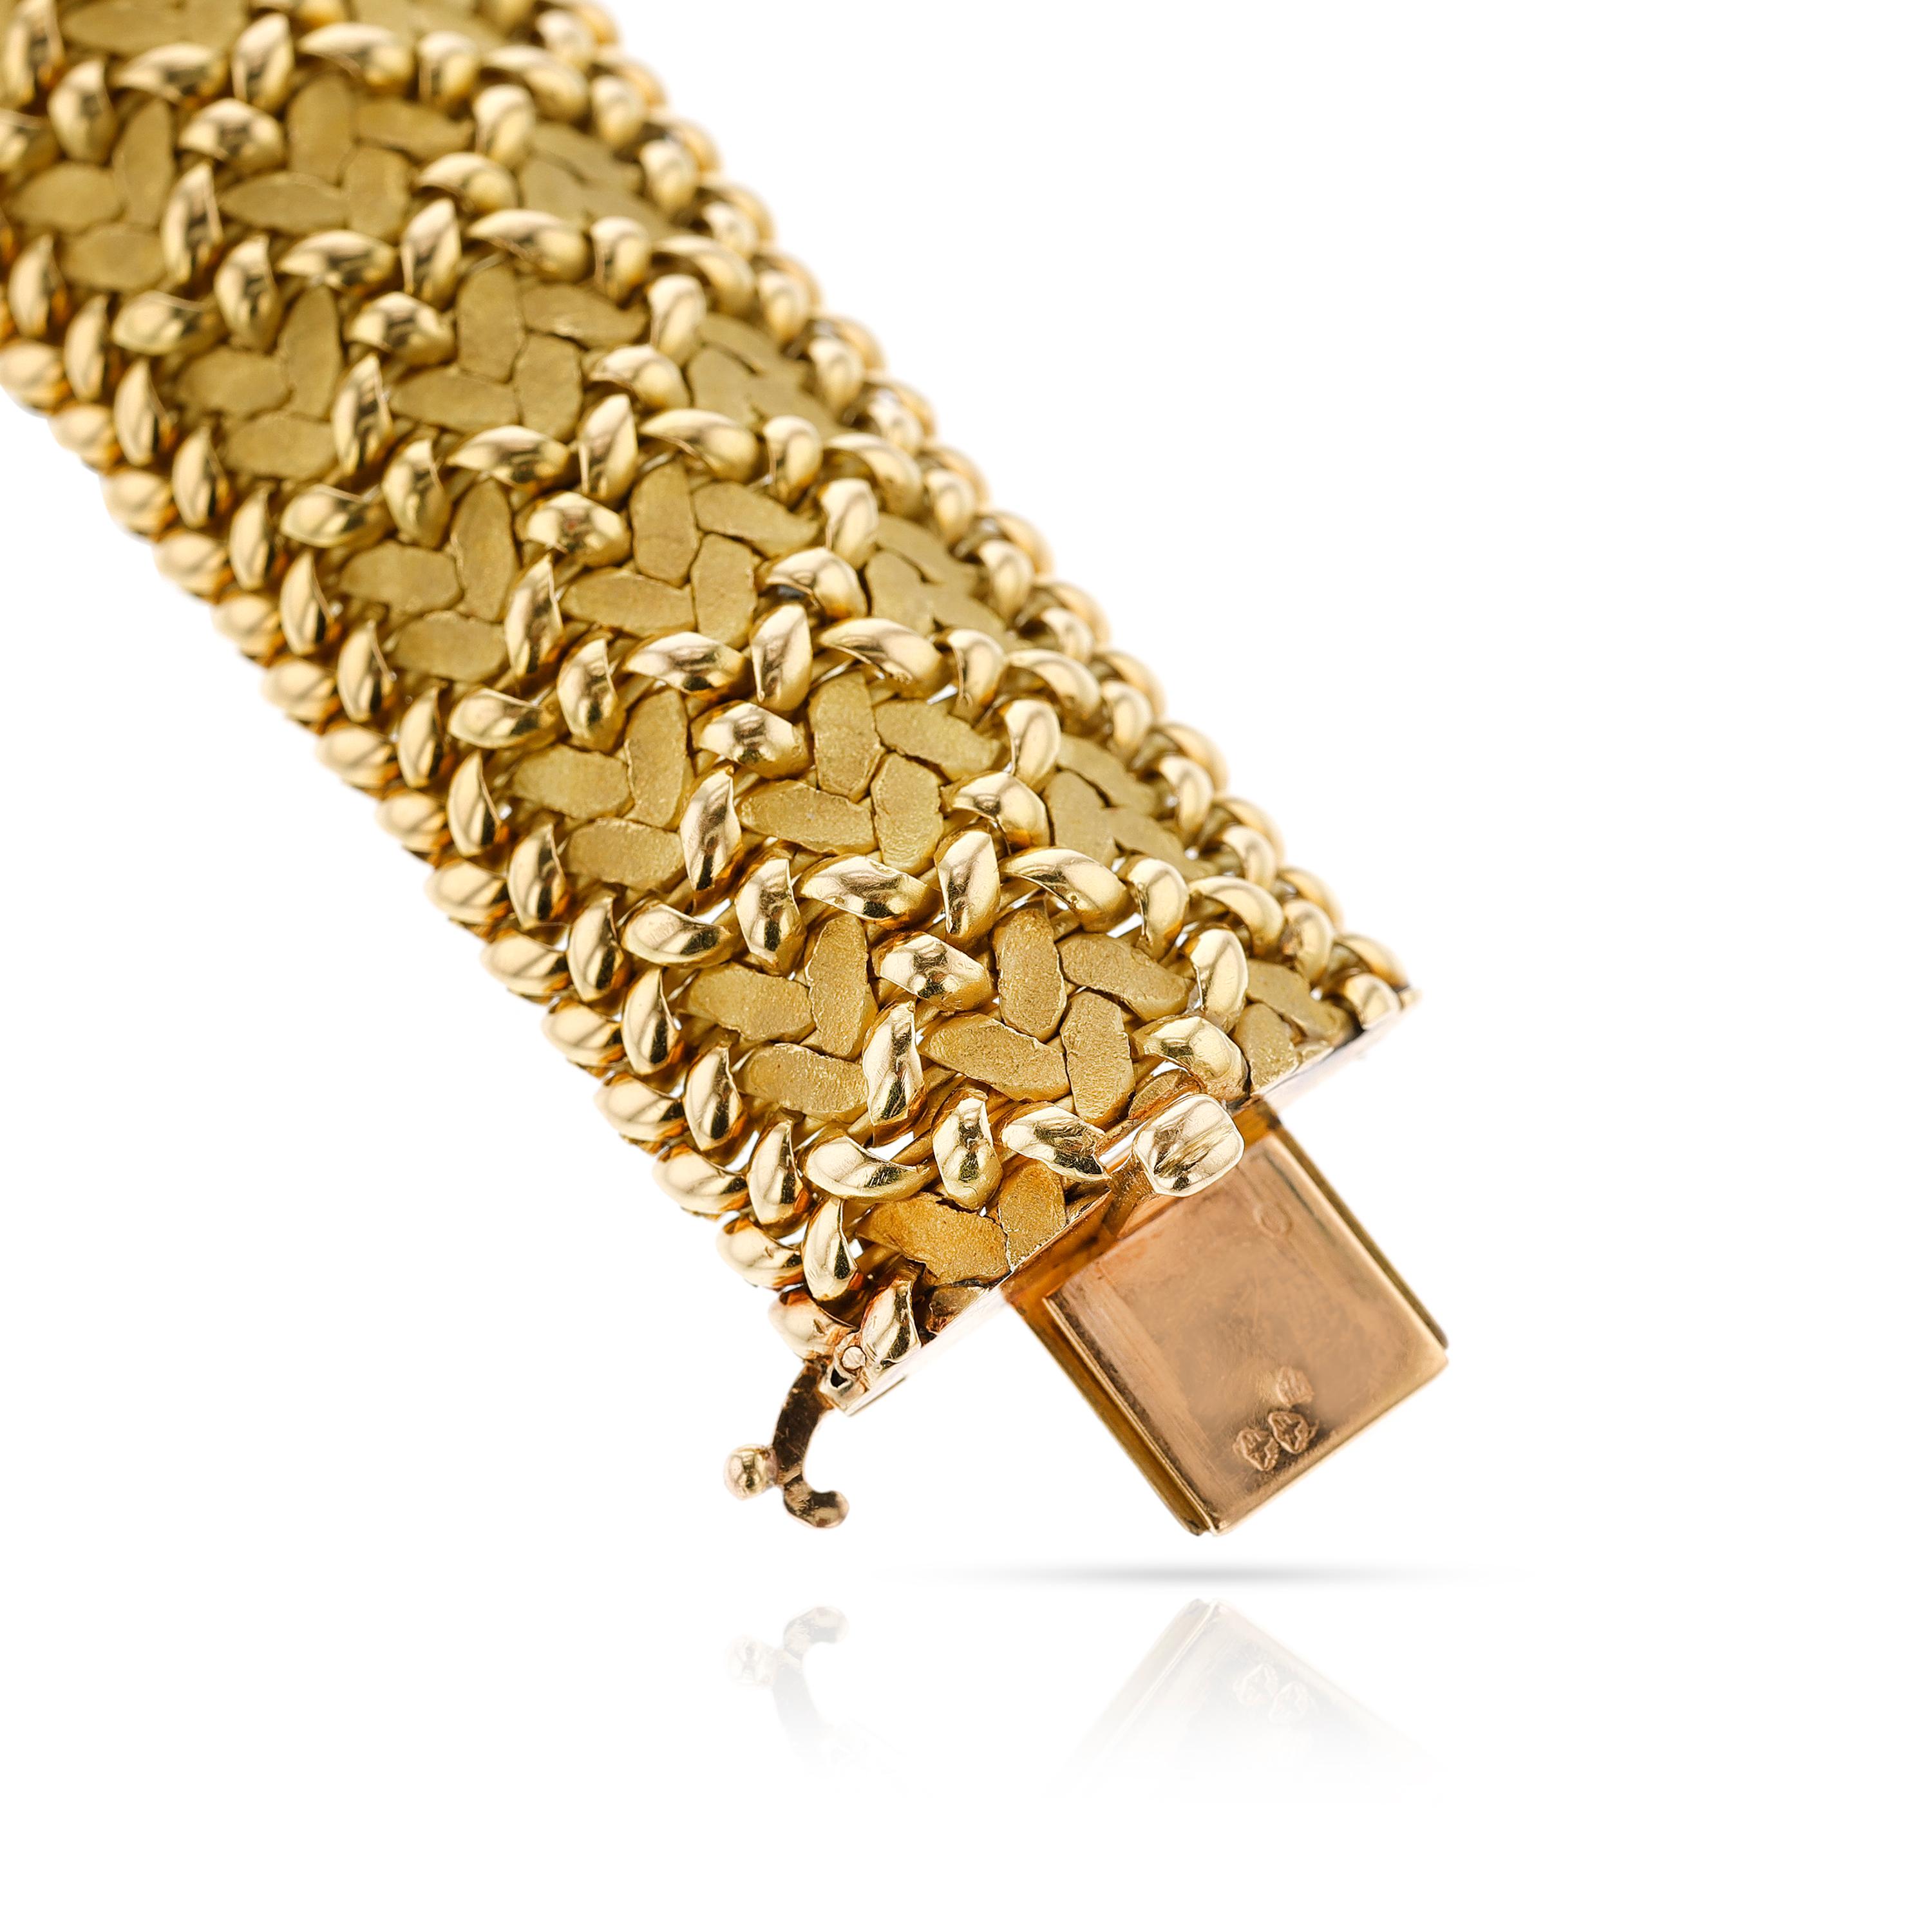 Georges L'enfant for Regner Paris Gold Woven Bracelet, 18k Gold. The bracelet is  a woven, bombe design with different finishes. The bracelet is circa 1970s. The length is 7.5 inches. The total weight is 109.15 grams. 

SKU: 1476-AMAJAJRPLW